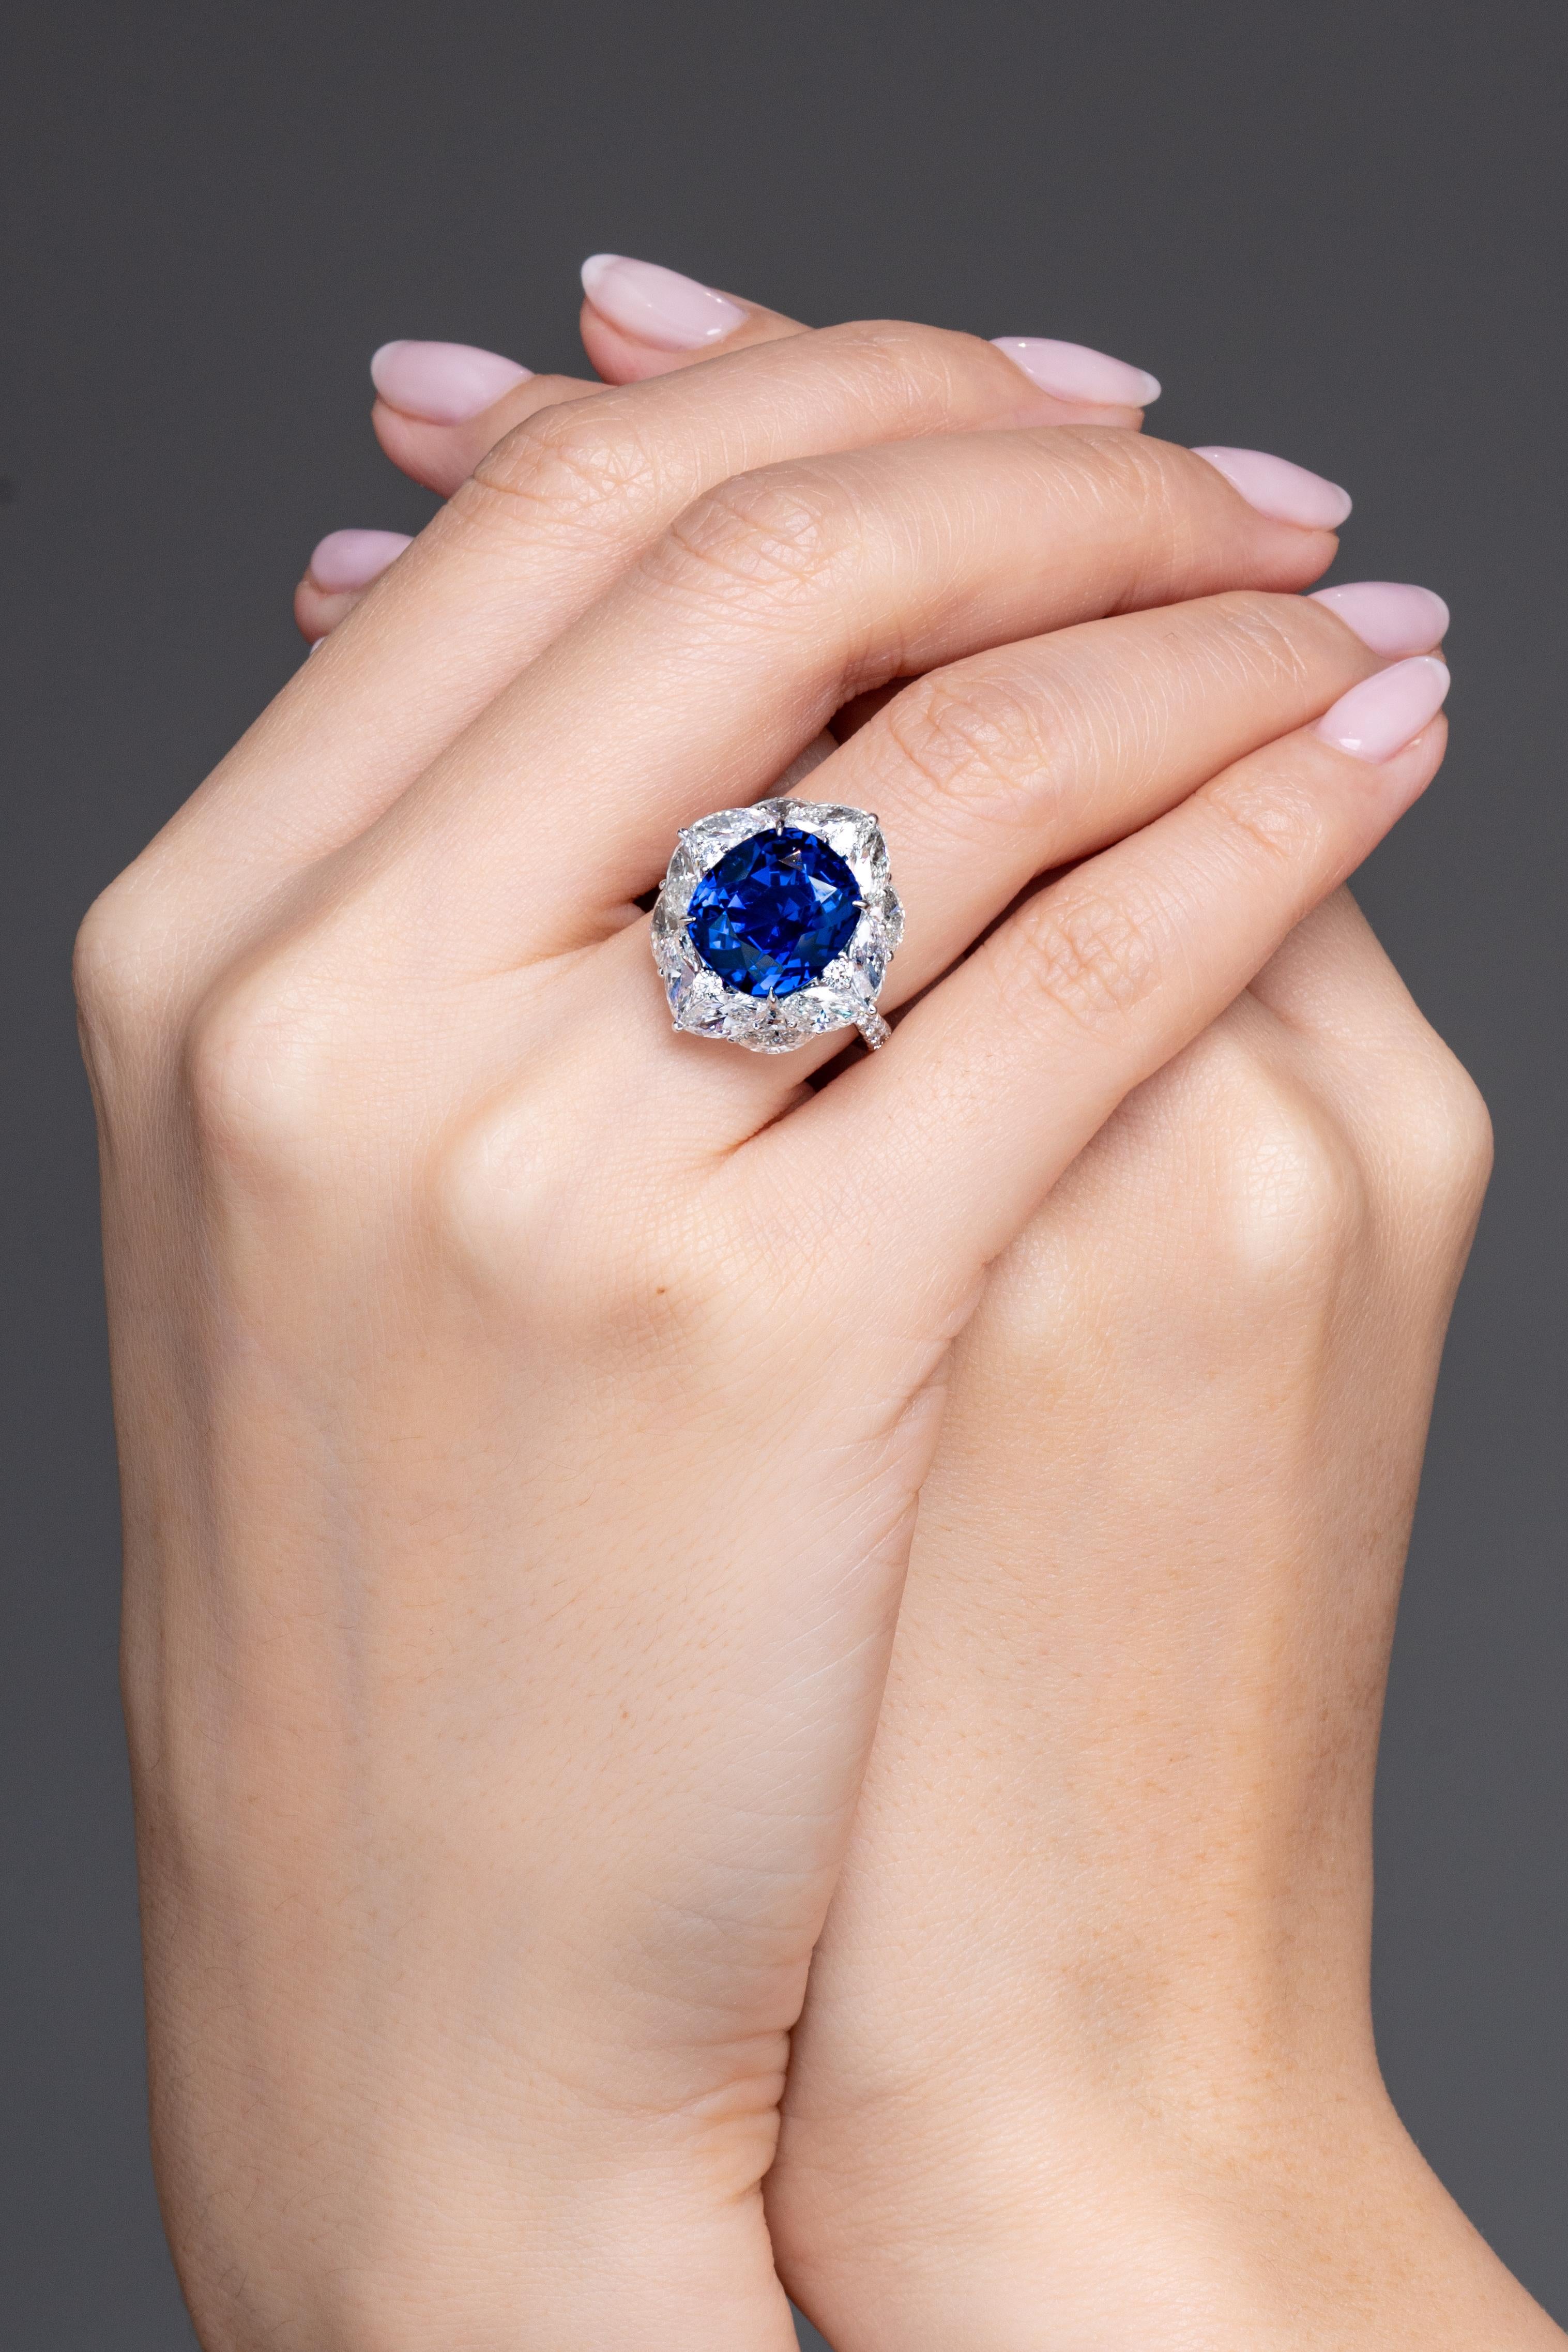 This Vihari Jewel ring features a natural 11.58 carat Royal Blue cushion cut Sapphire from Sri Lanka (GRS Certificate #2020-082763) with no artificial heating. GRS describes the colour as naturally 